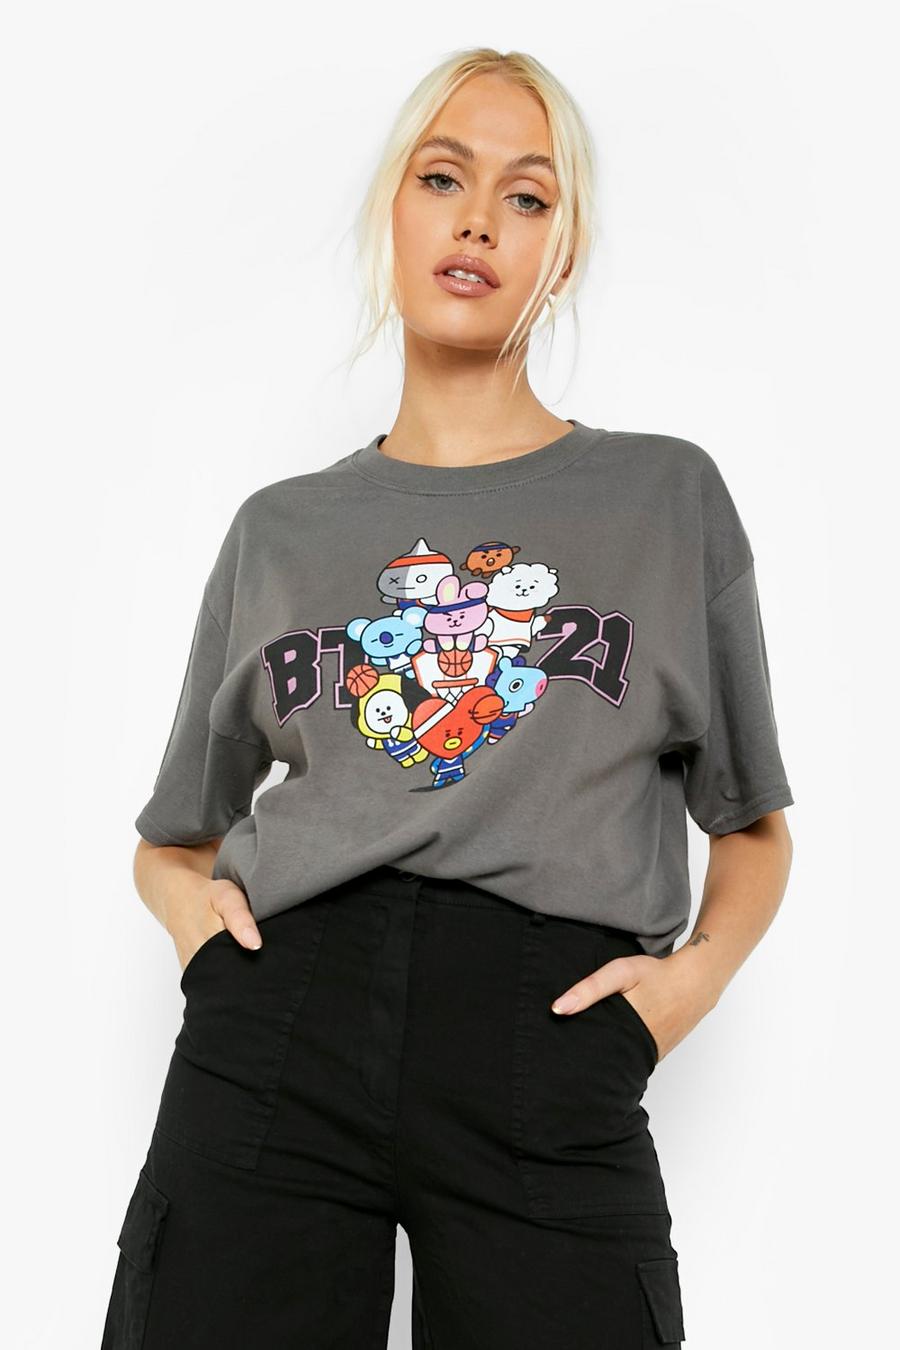 Charcoal grey BT21 License Oversized T Shirt